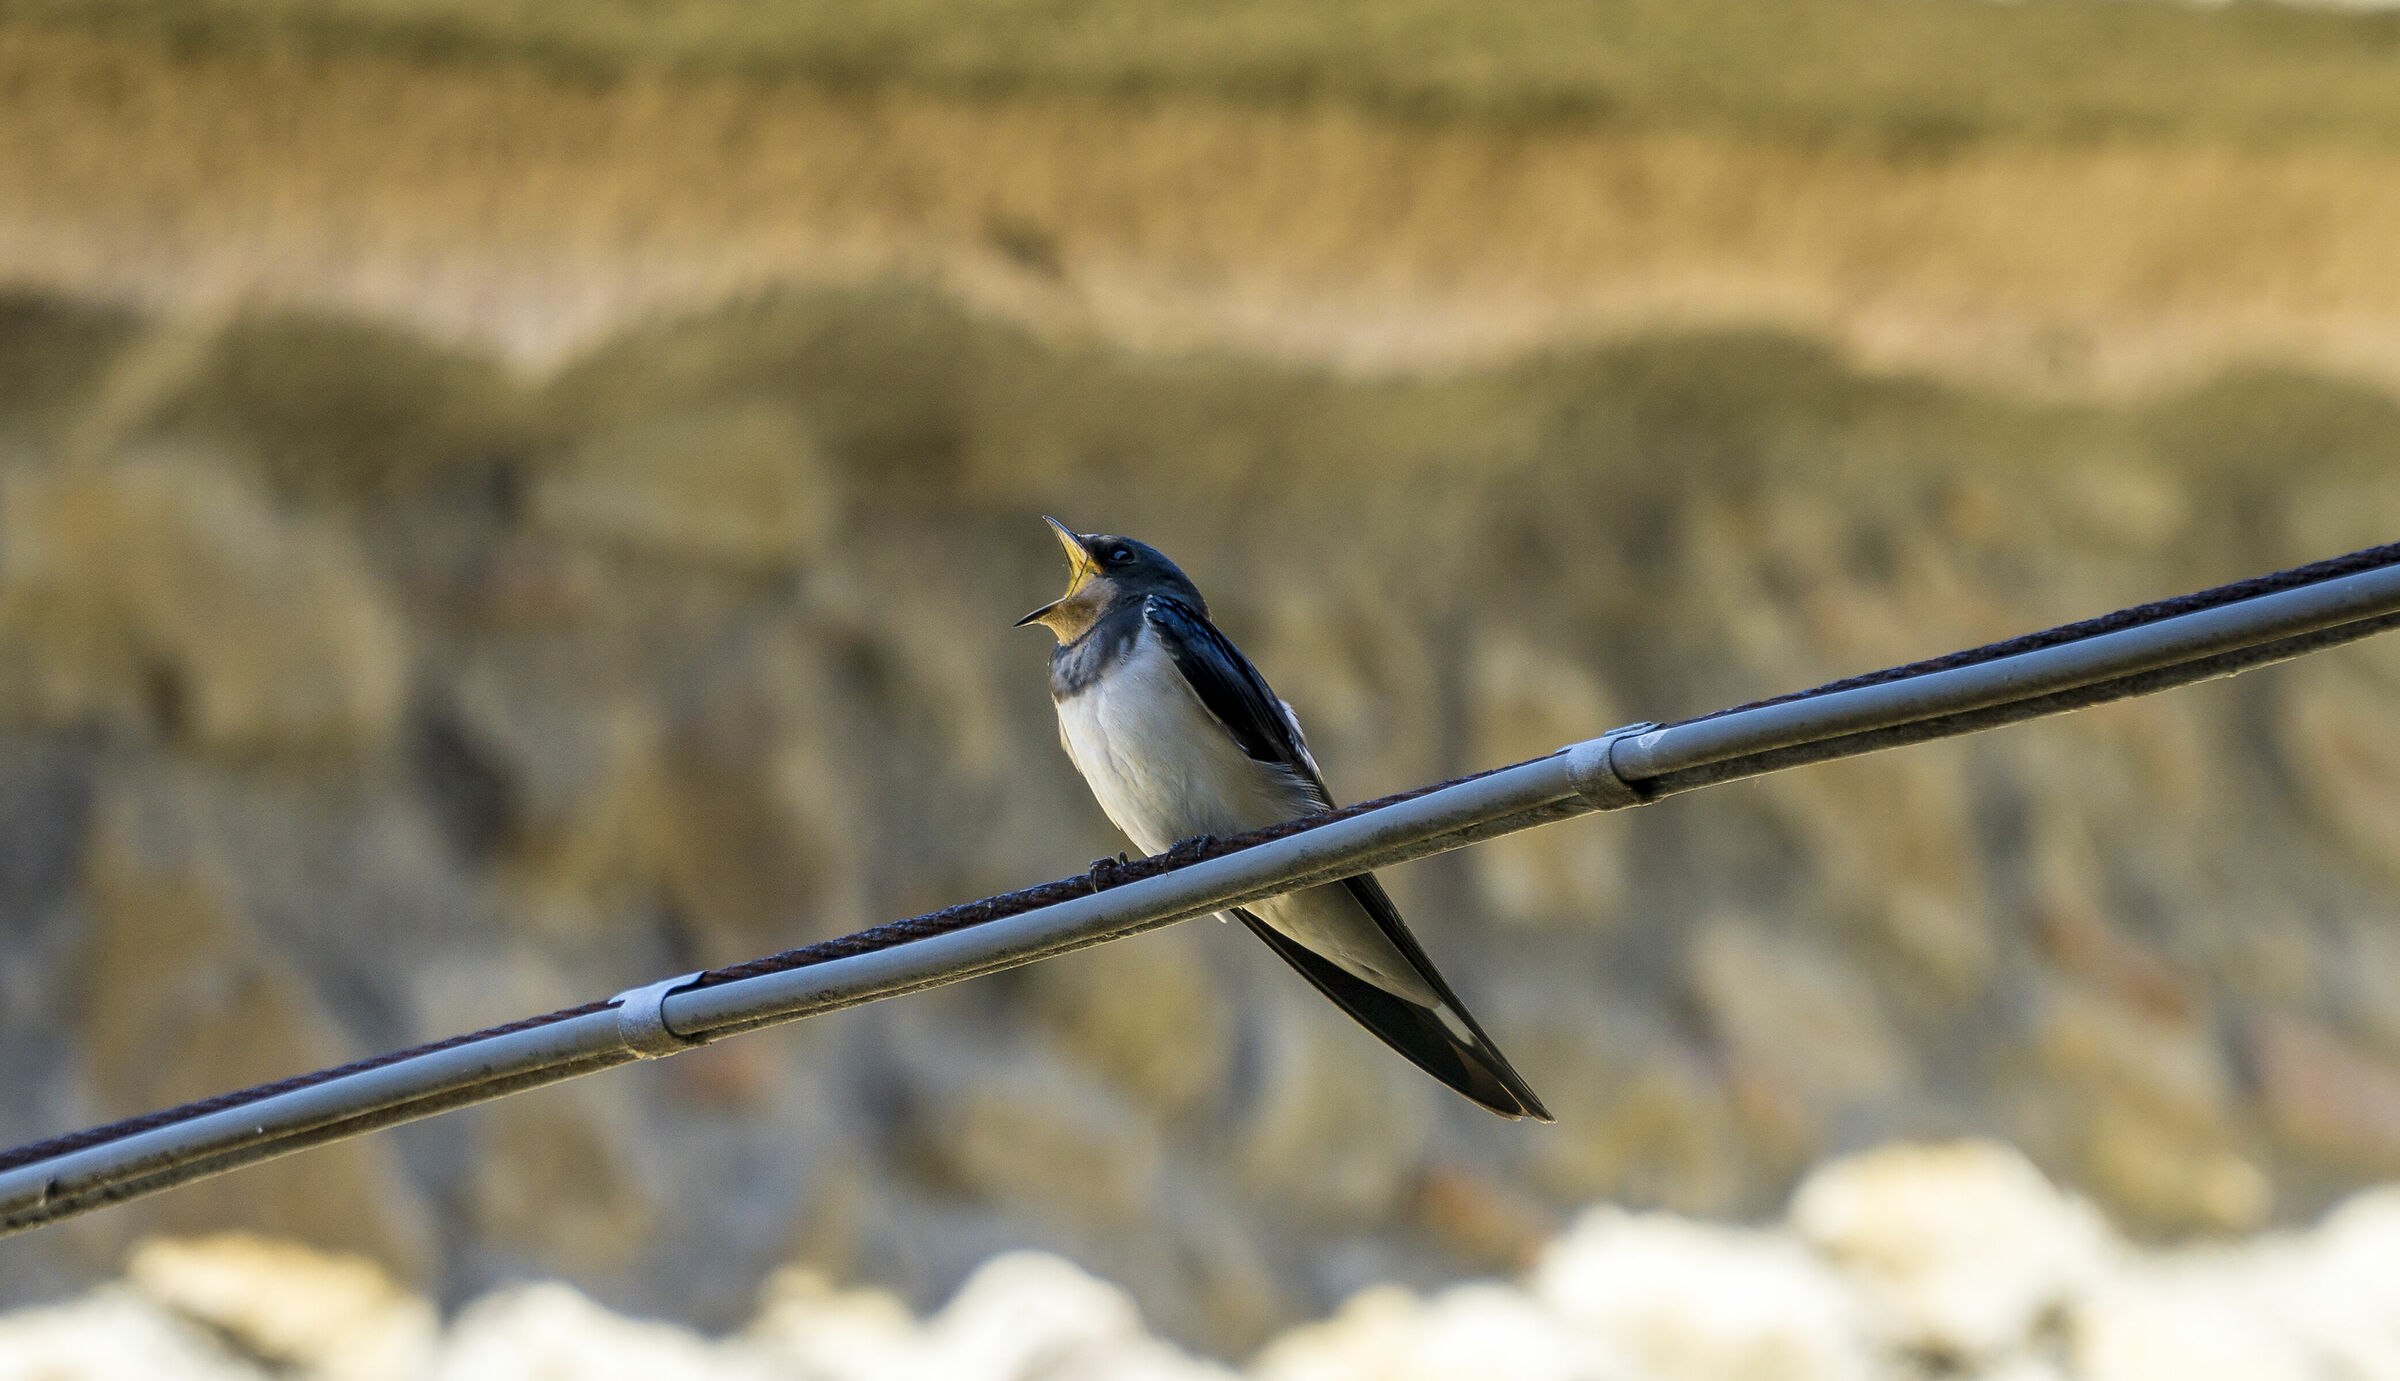 Humped swallow...